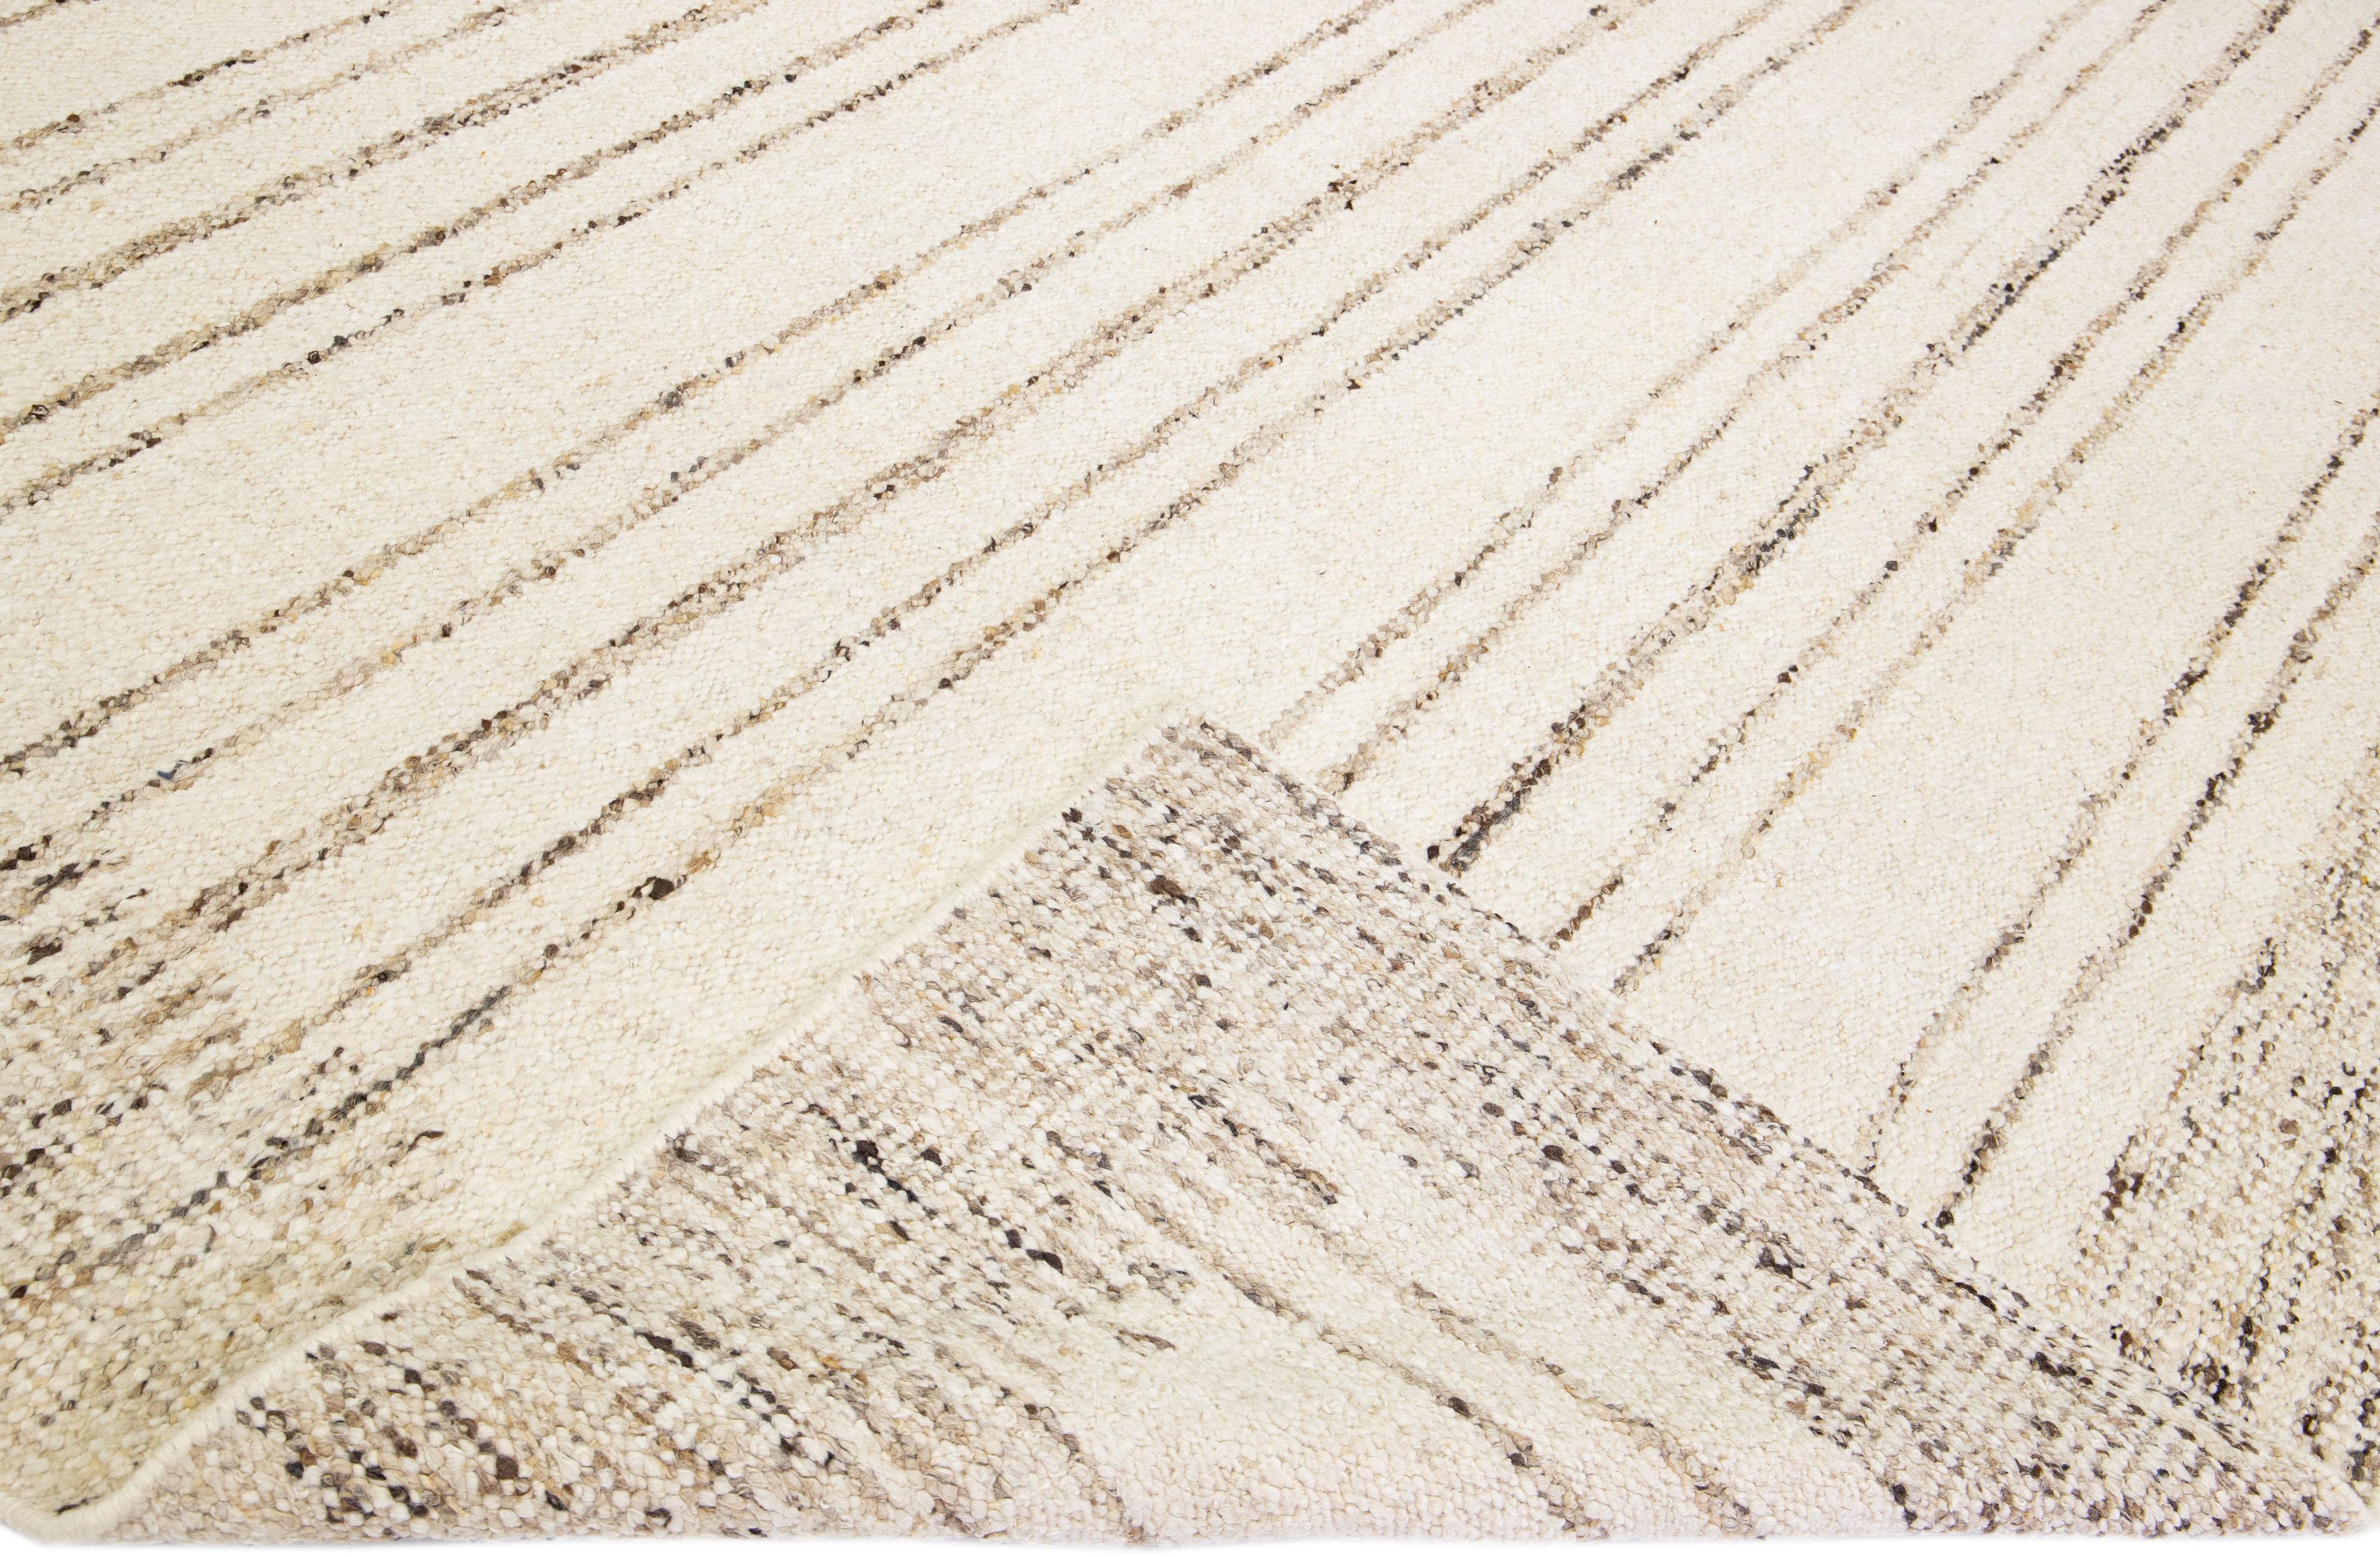 Beautiful modern Moroccan style hand-knotted wool rug with a beige field. This piece has designed frame and brown accent colors in a gorgeous stripe design.

This rug measures: 12' x 15'

Our rugs are professional cleaning before shipping.